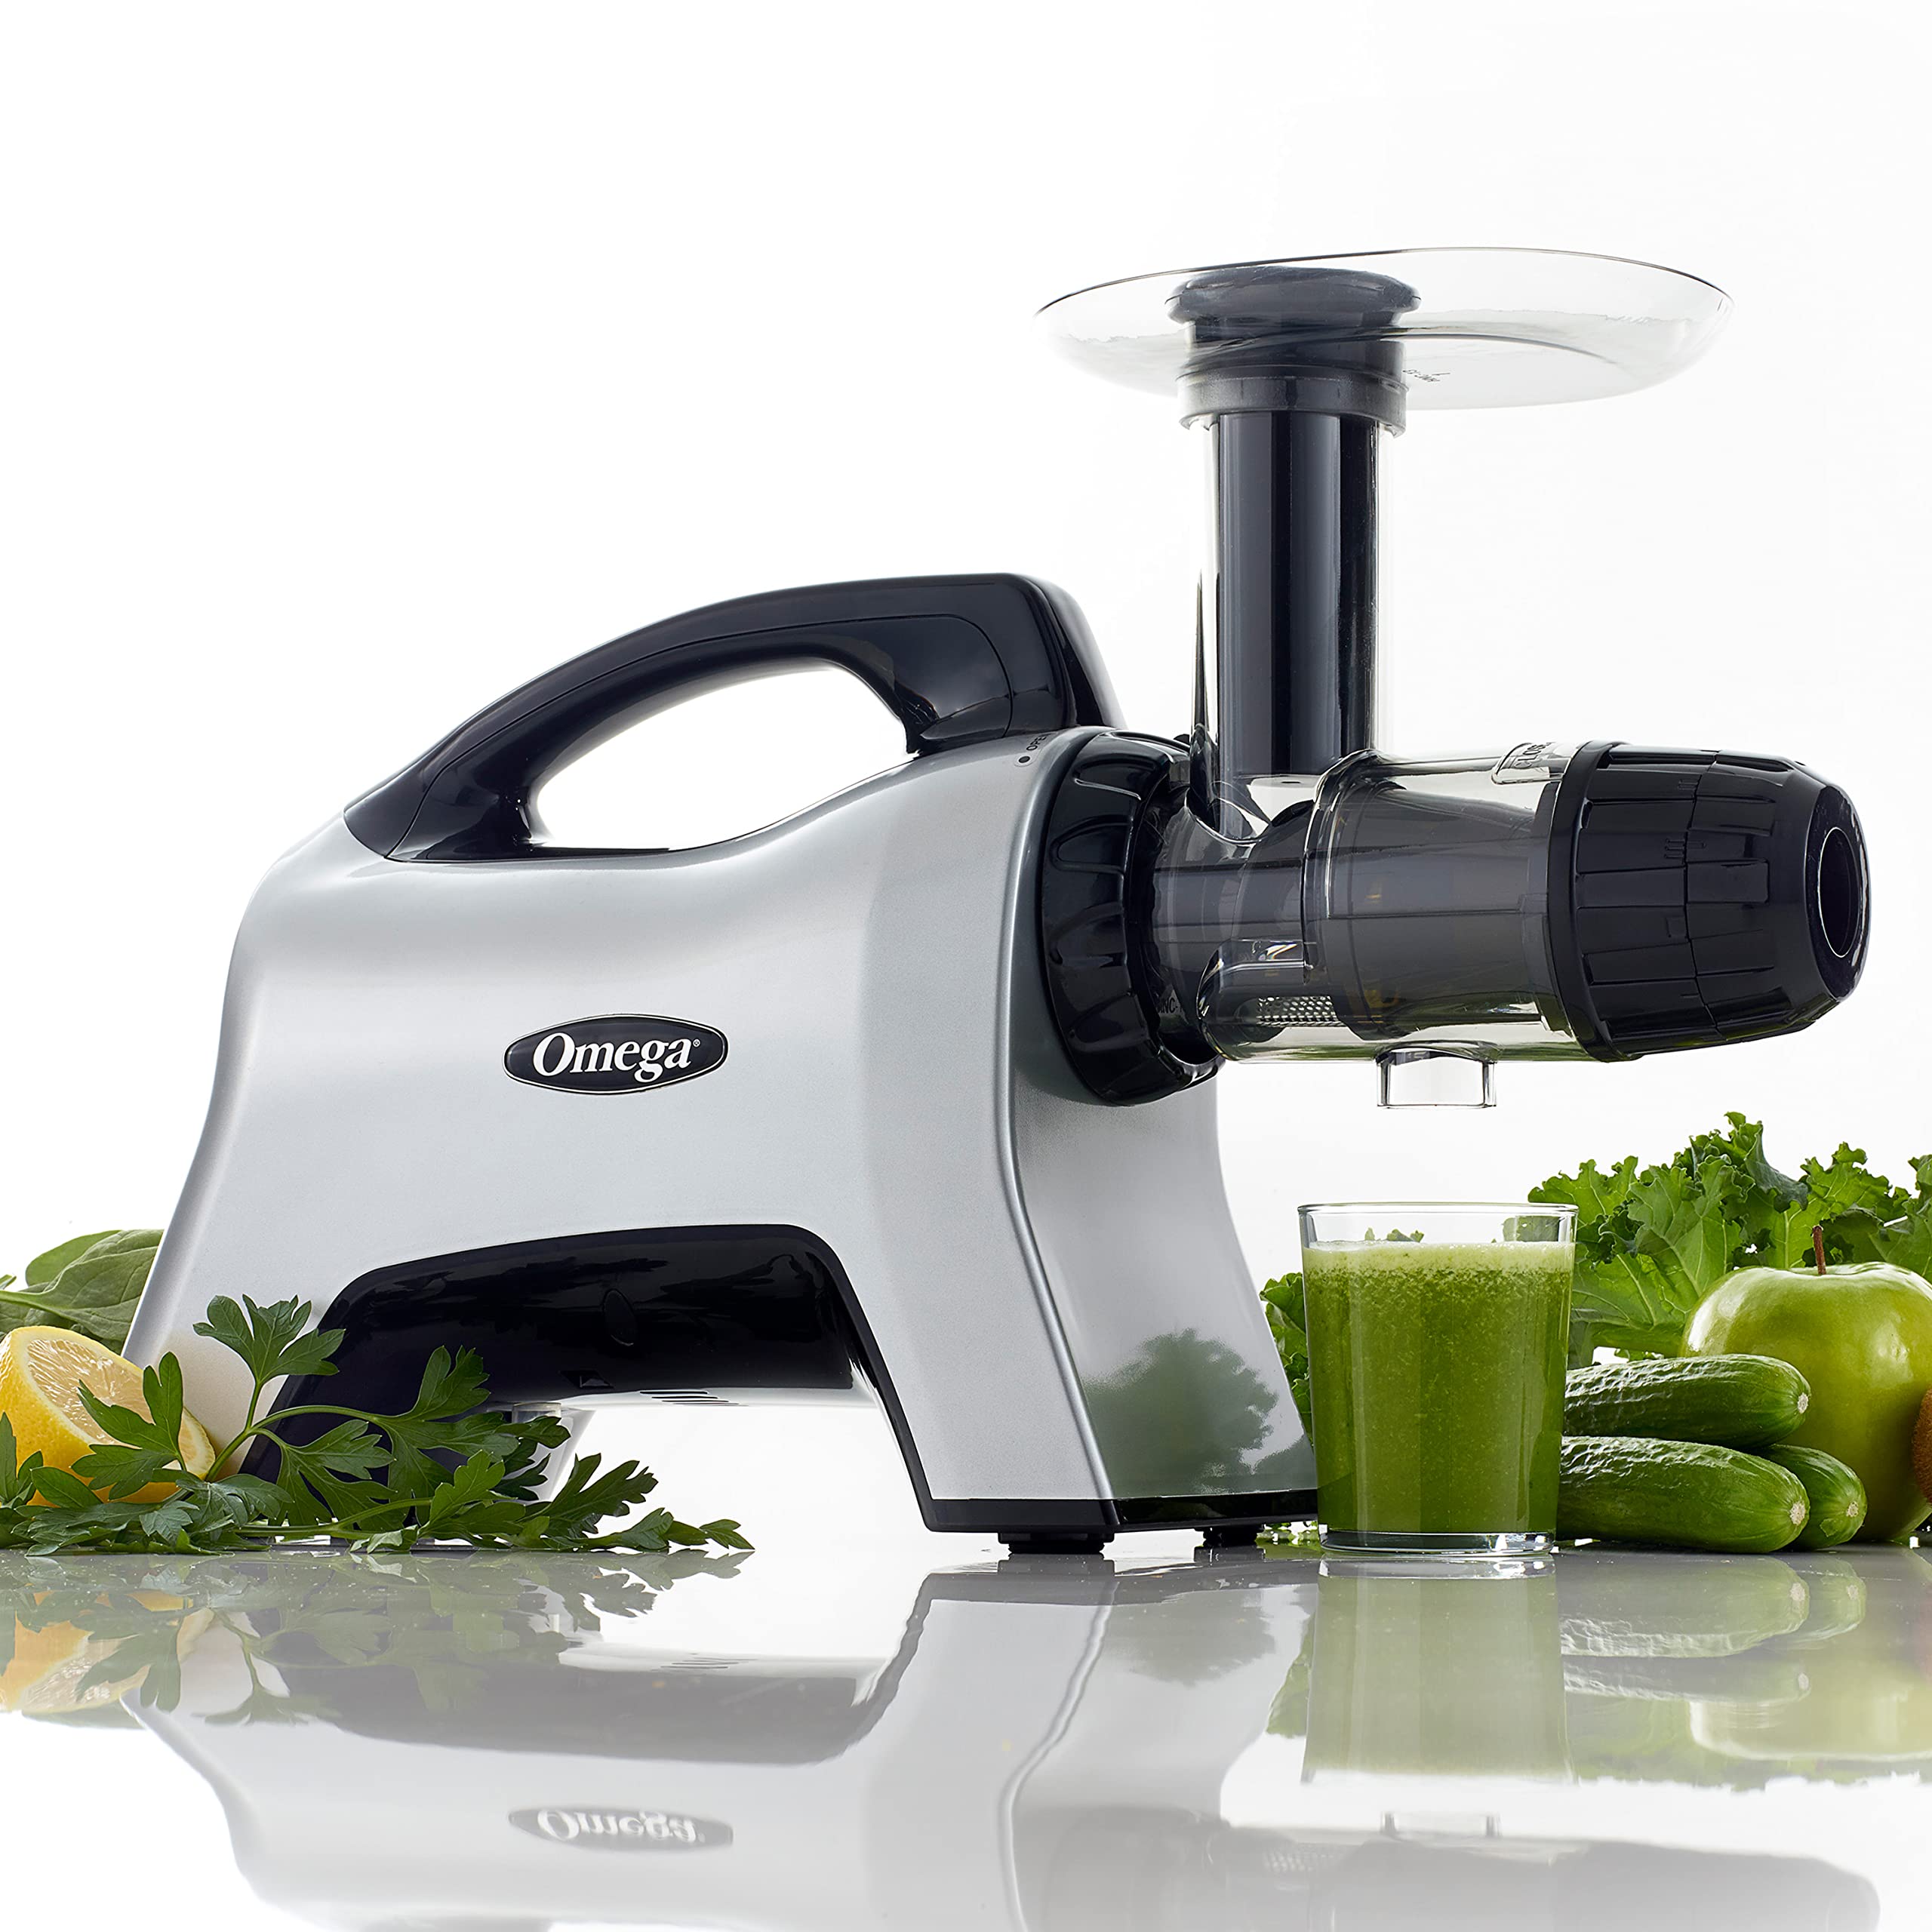 Omega Juicer NC1000HDS Juice Extractor and Nutrition System Slow Masticating BPA-FREE with Quiet Motor and Reverse Easy to Clean, 200-Watt, Silver